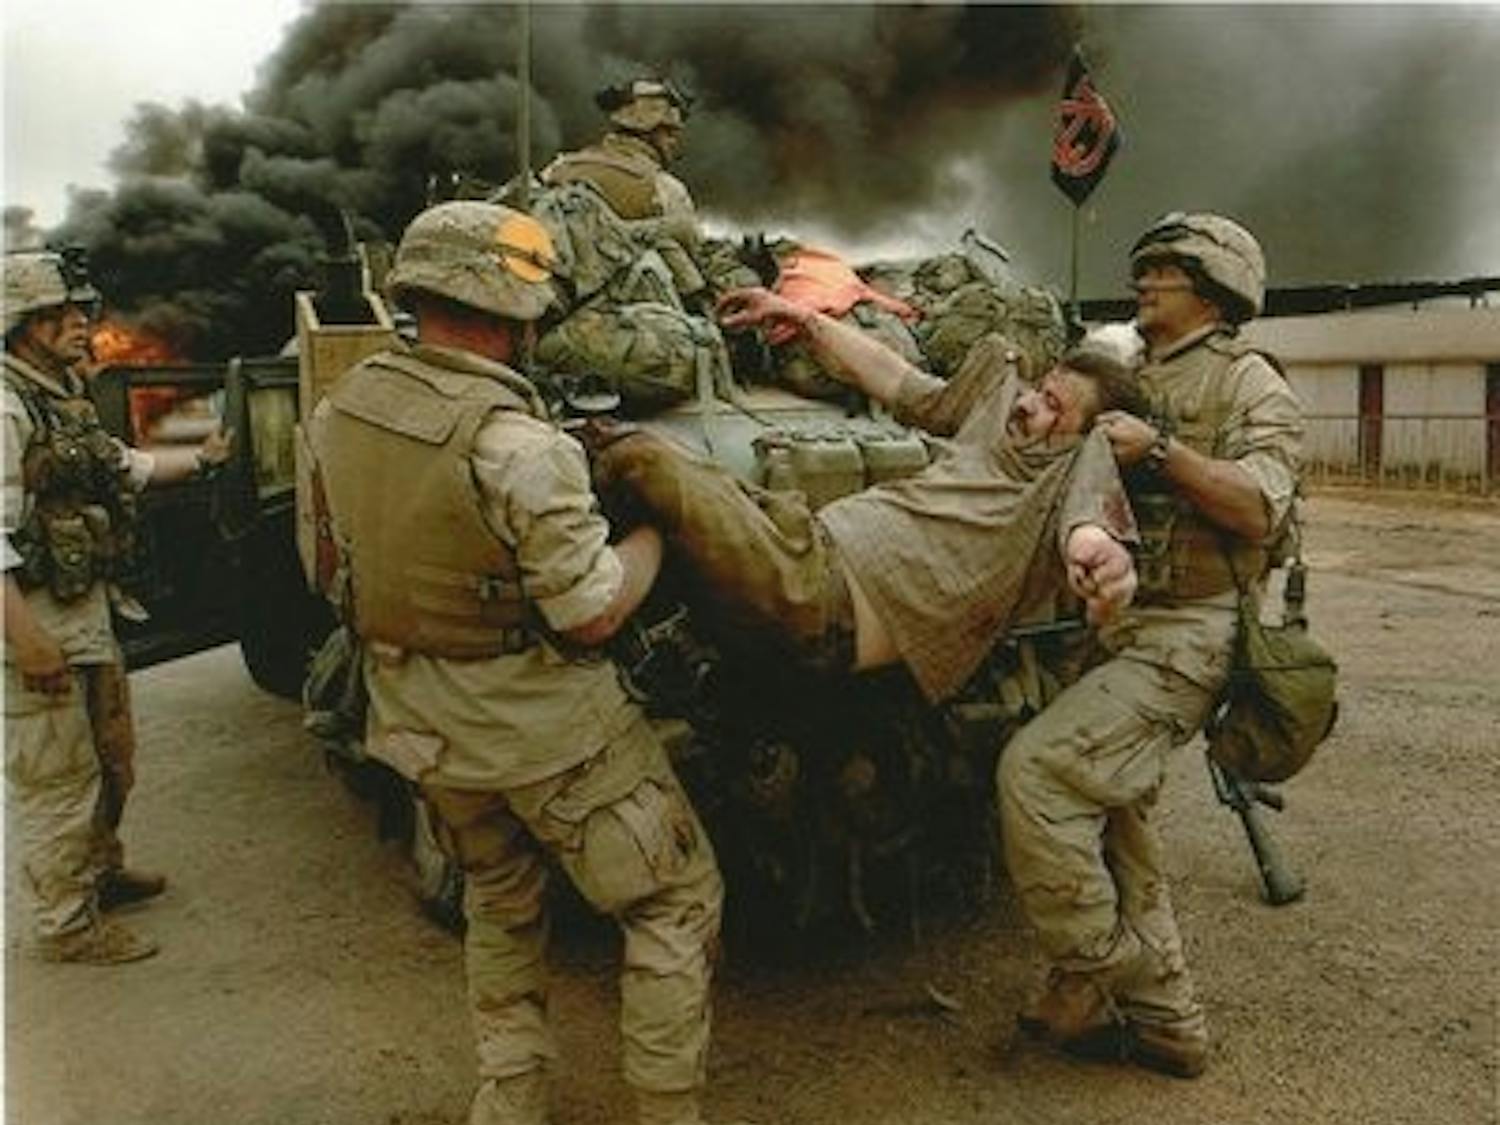 Ian Hogg (far left), a sergeant in the U.S. Marine Corps, oversees members of his unit lifting an injured man into Hogg's humvee, on which he displayed an Auburn flag. Hogg served in Iraq from January to June of 2003. He is now fighting Lou Gehrig's disease. (Contributed by MISTY Hogg)